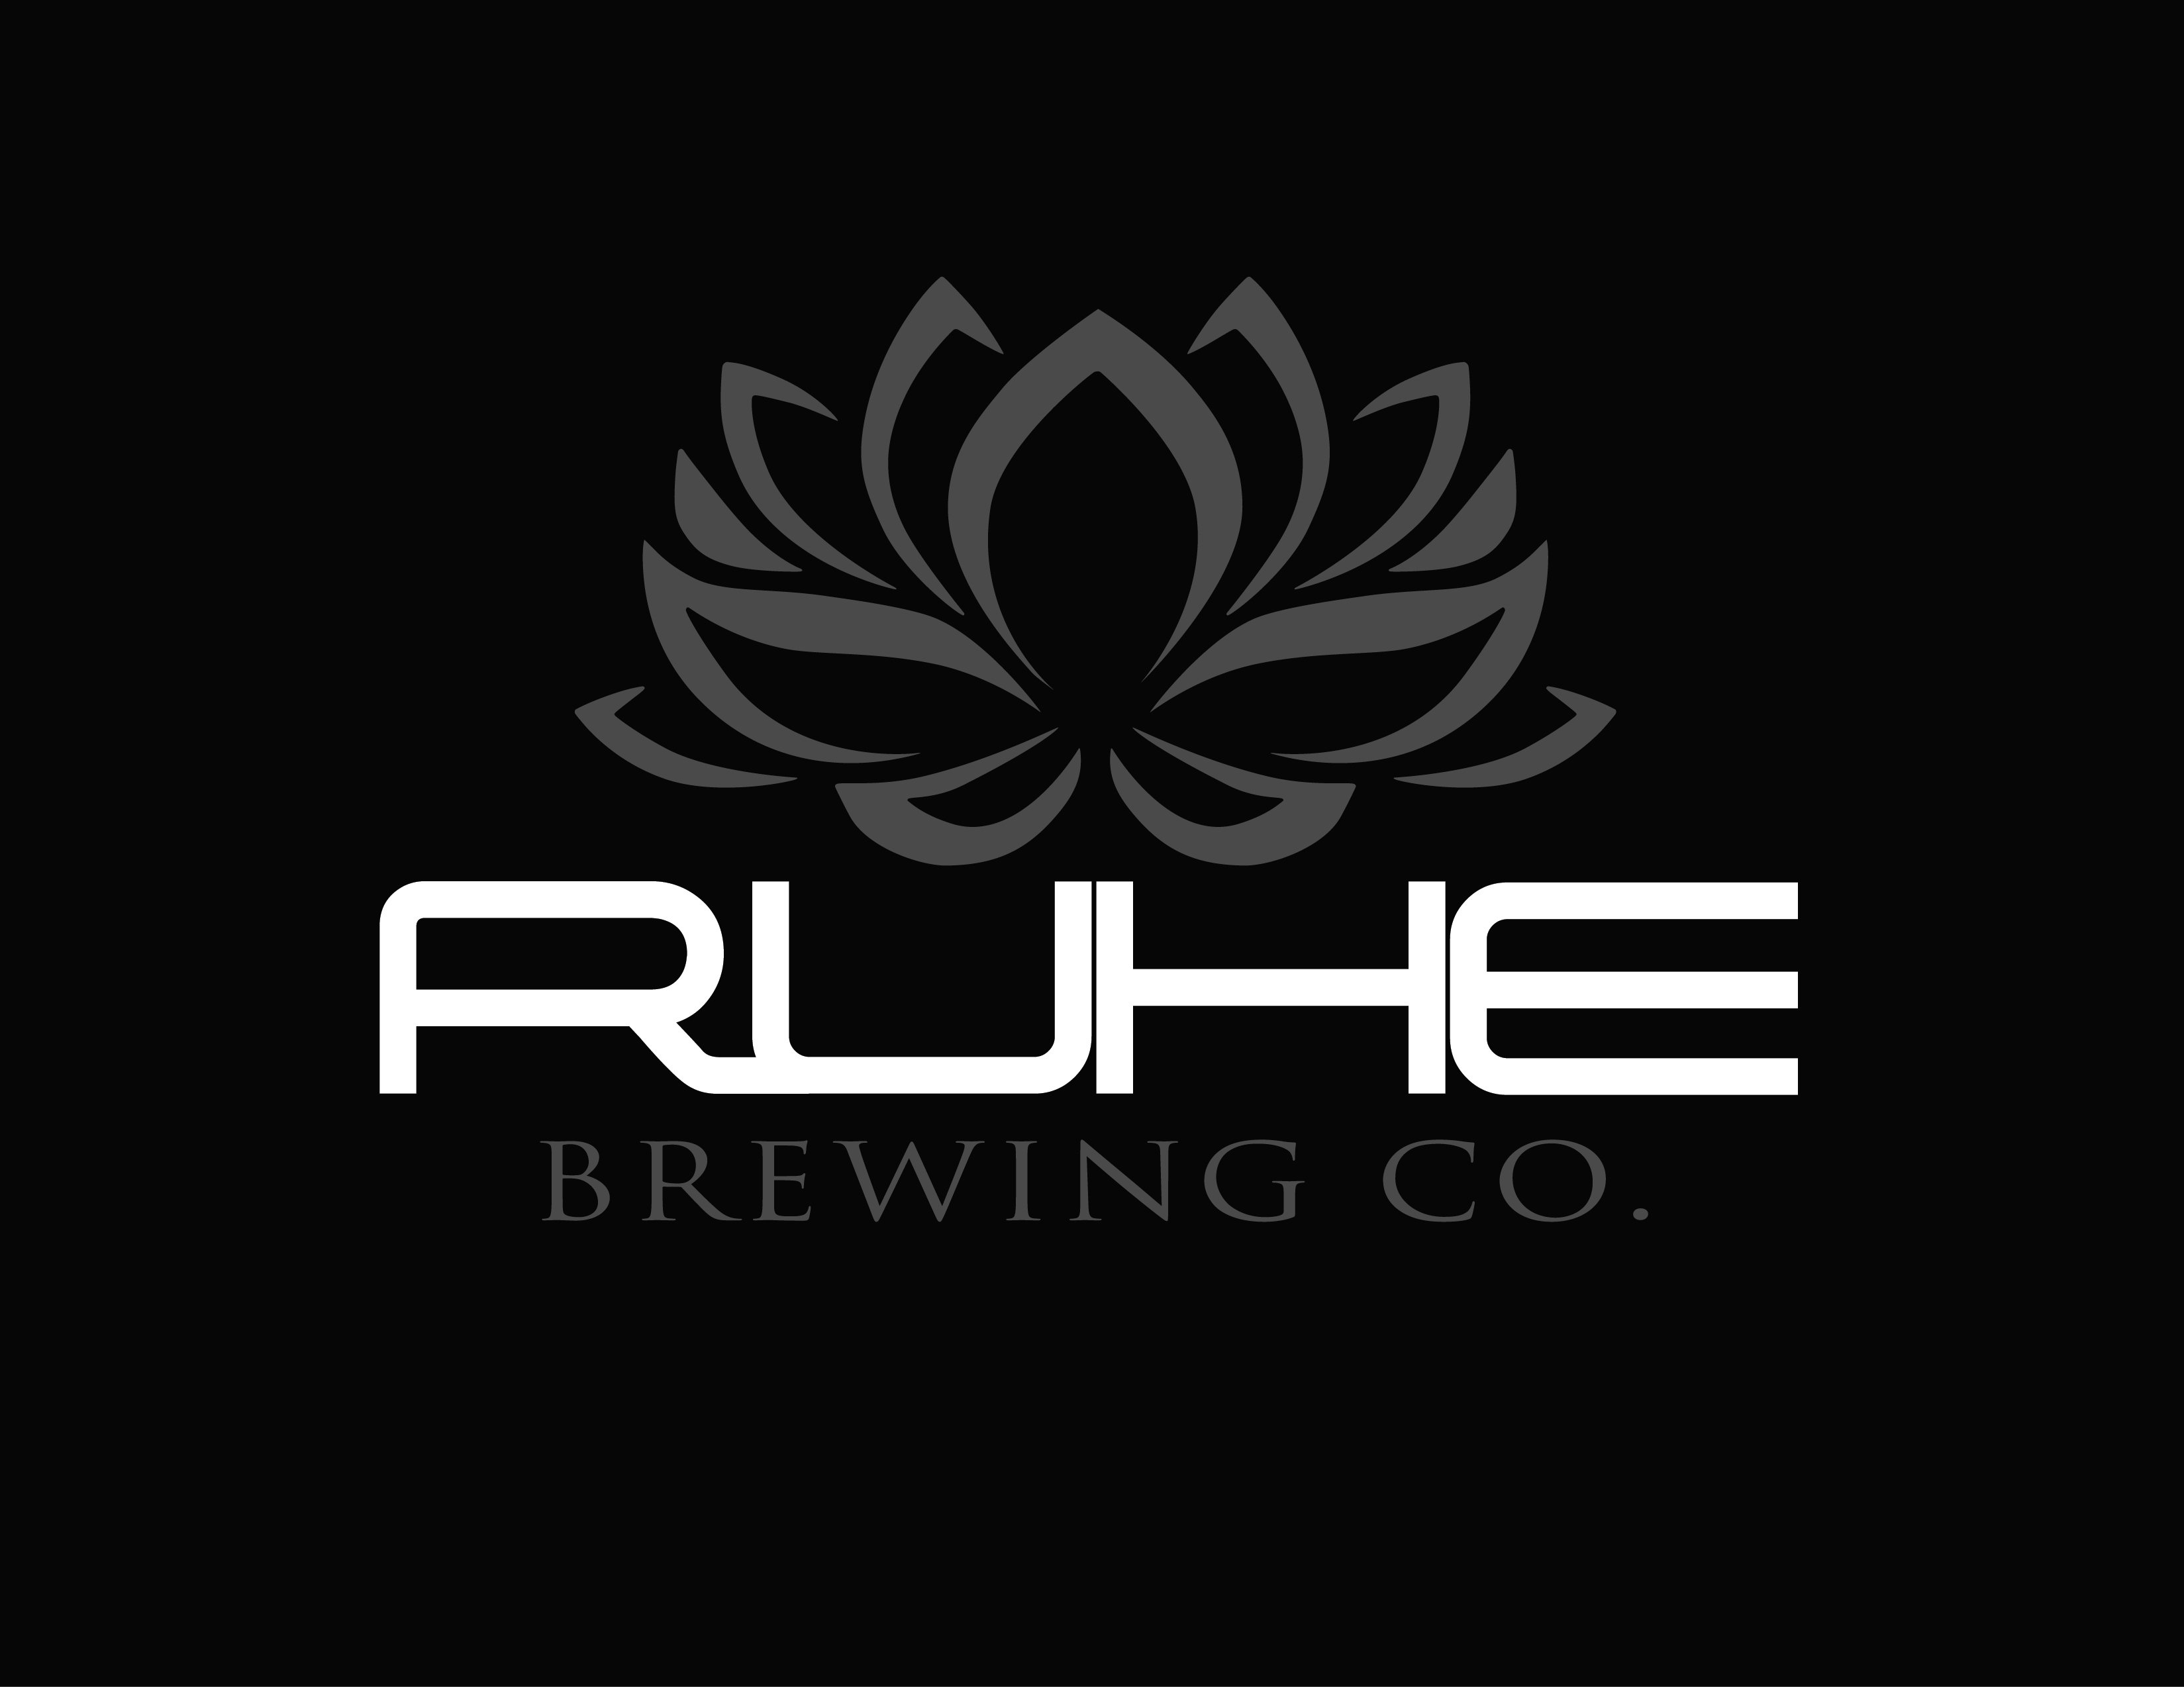 RUHE152 Bistro, Brewery, Distillery, located in Nappanee, IN offers a great selection of fine foods, craft beers and cocktails.  Join us to Ruhe/Relax!